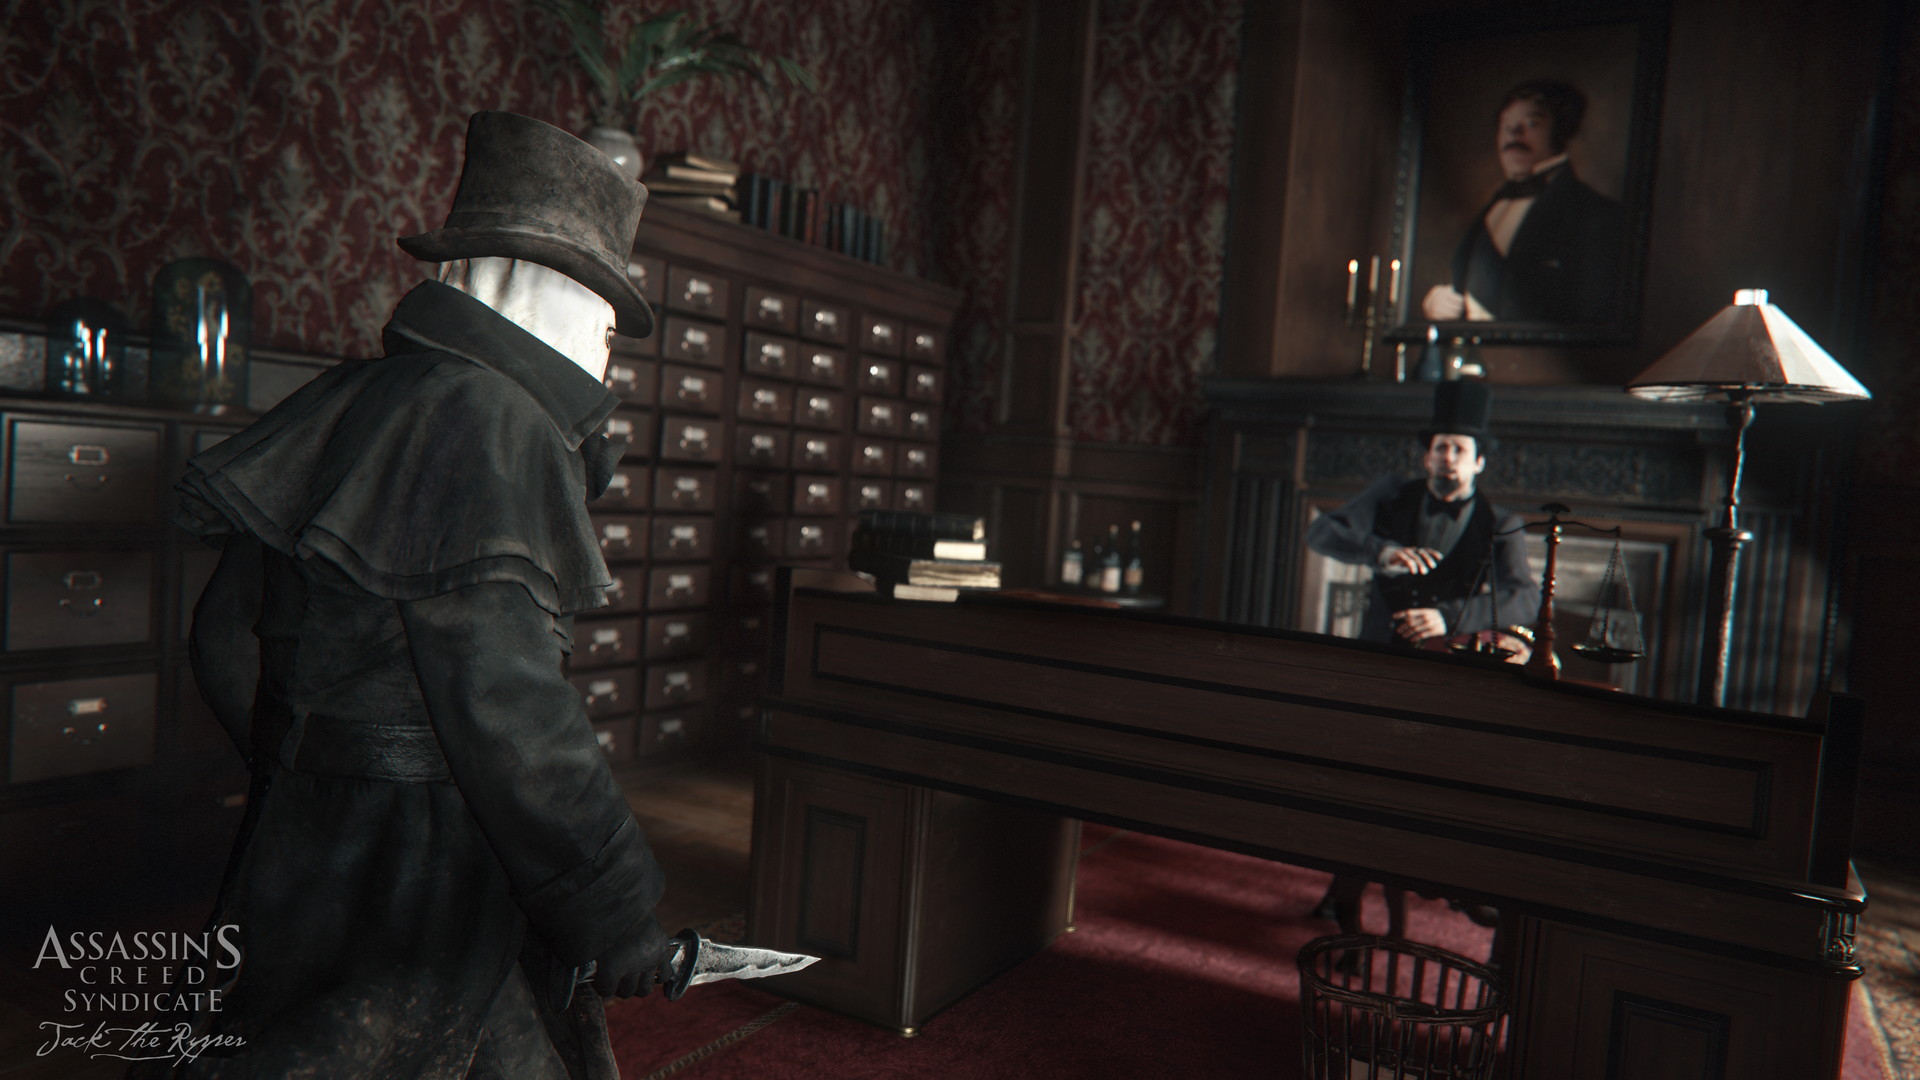 Assassin's Creed: Syndicate - Jack the Ripper - screenshot 5